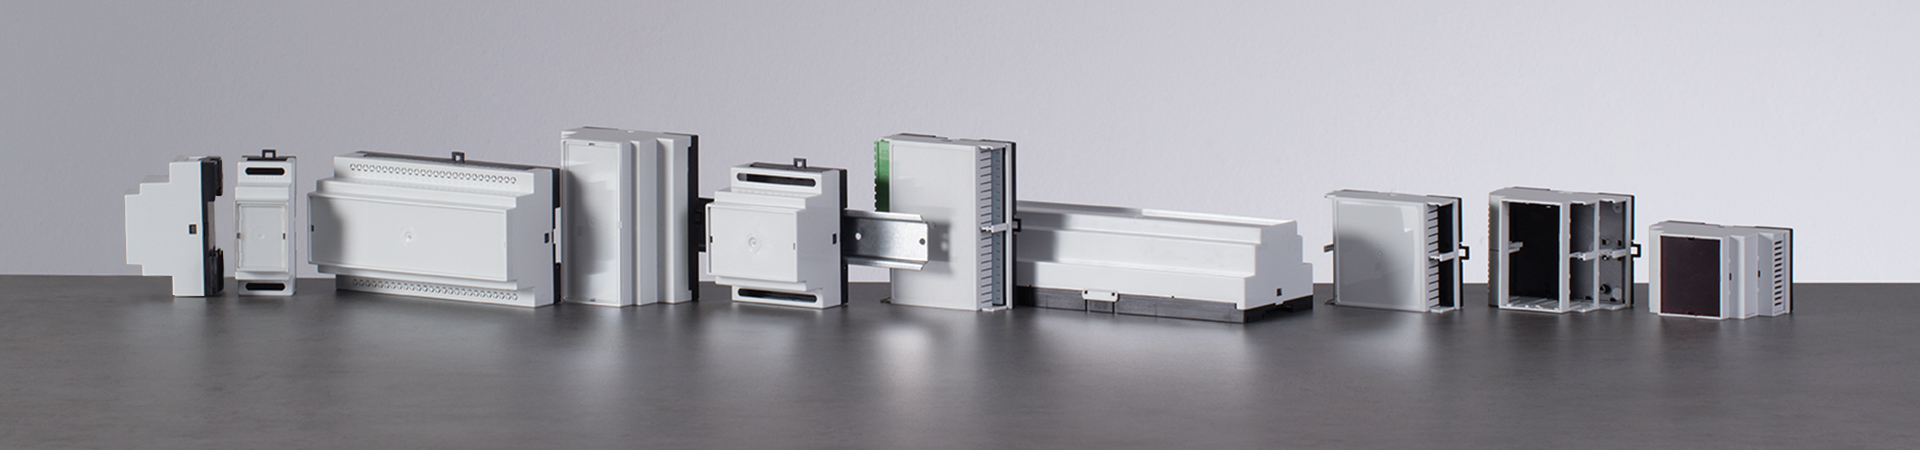 Guide to specifying DIN rail enclosures